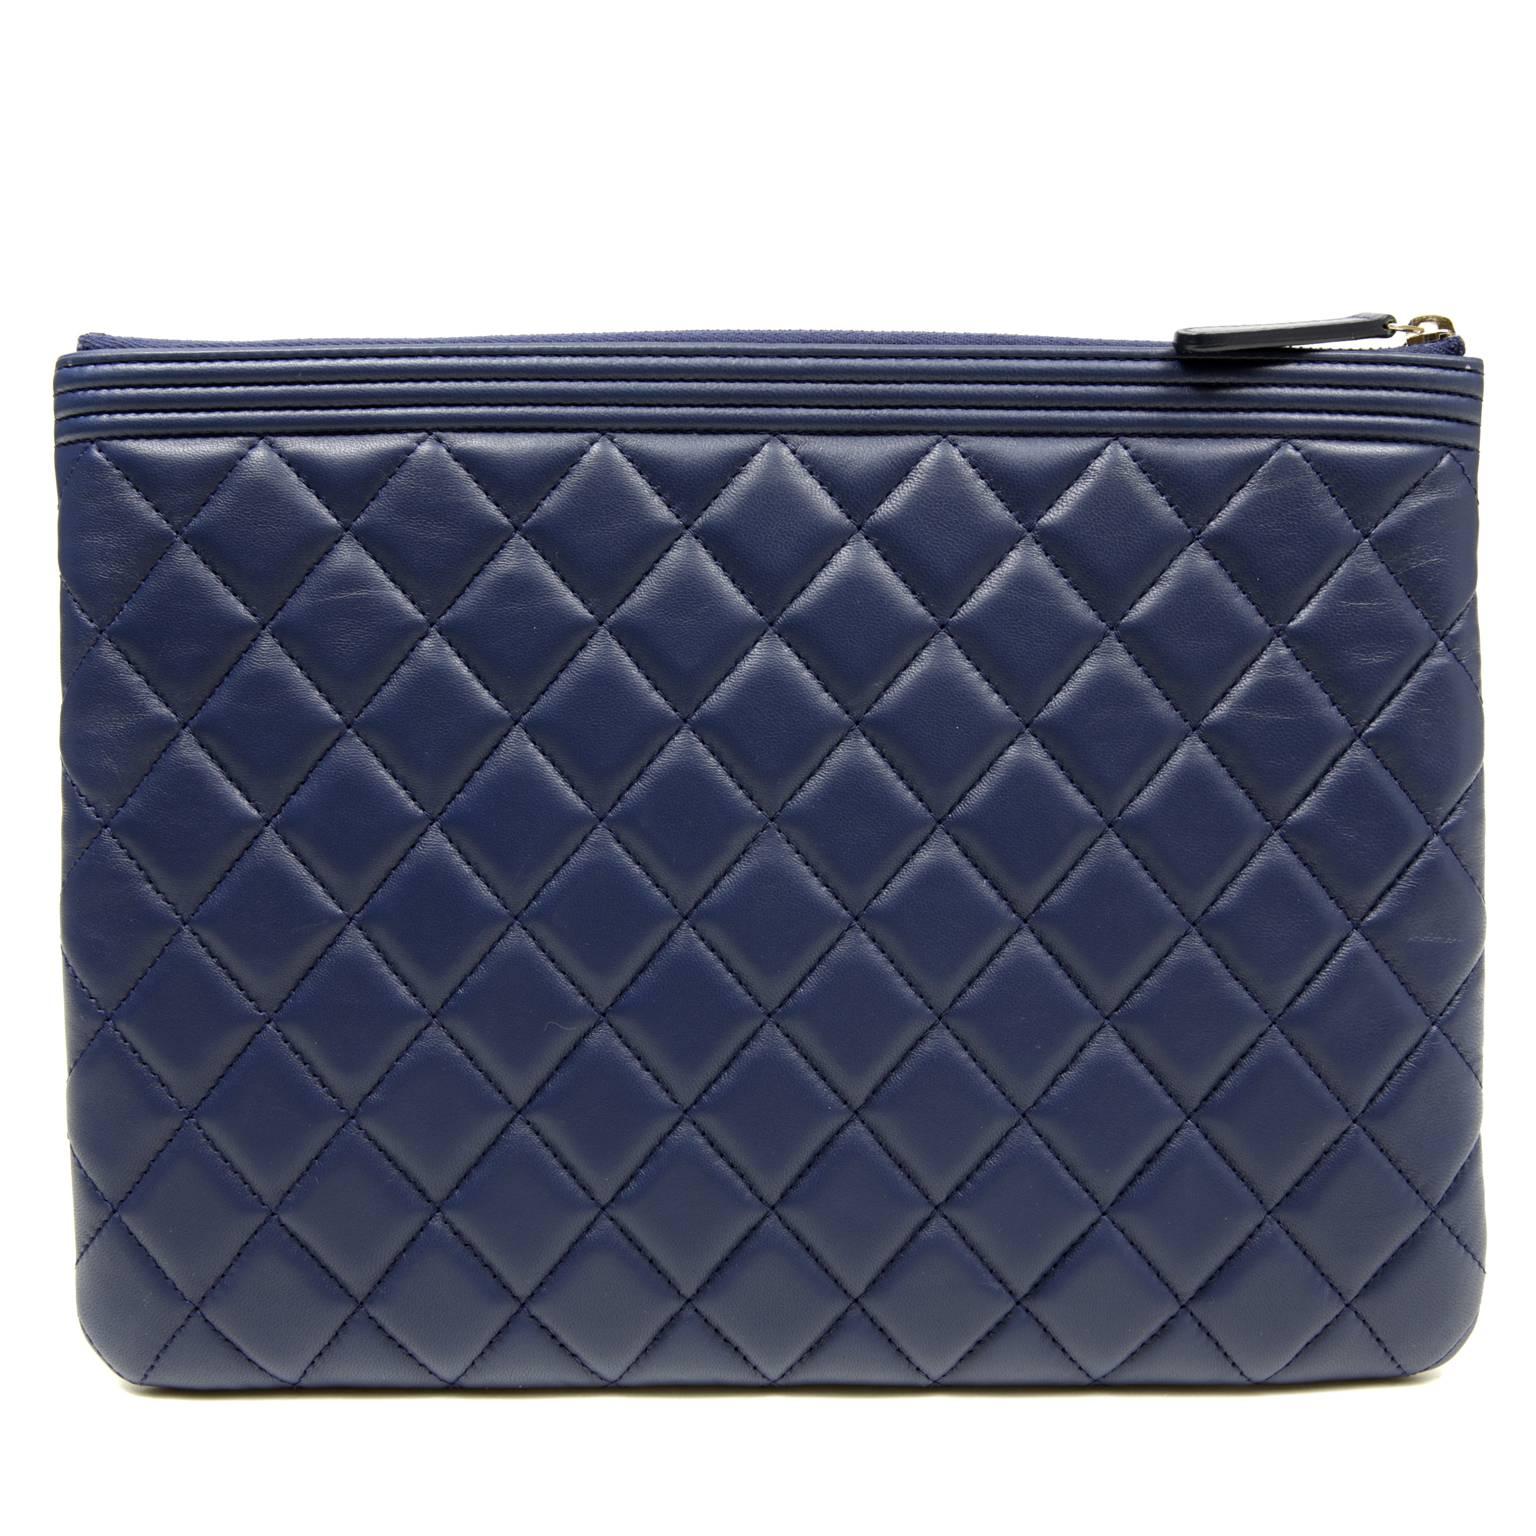 Chanel Blue Leather Boy Portfolio-  PRISTINE; appearing never before carried. 
 
Blue leather is quilted in signature Chanel diamond stitched pattern.  Gold tone interlocking CC Boy plaque.  Zippered top with quilted interior.  Made in Italy. 